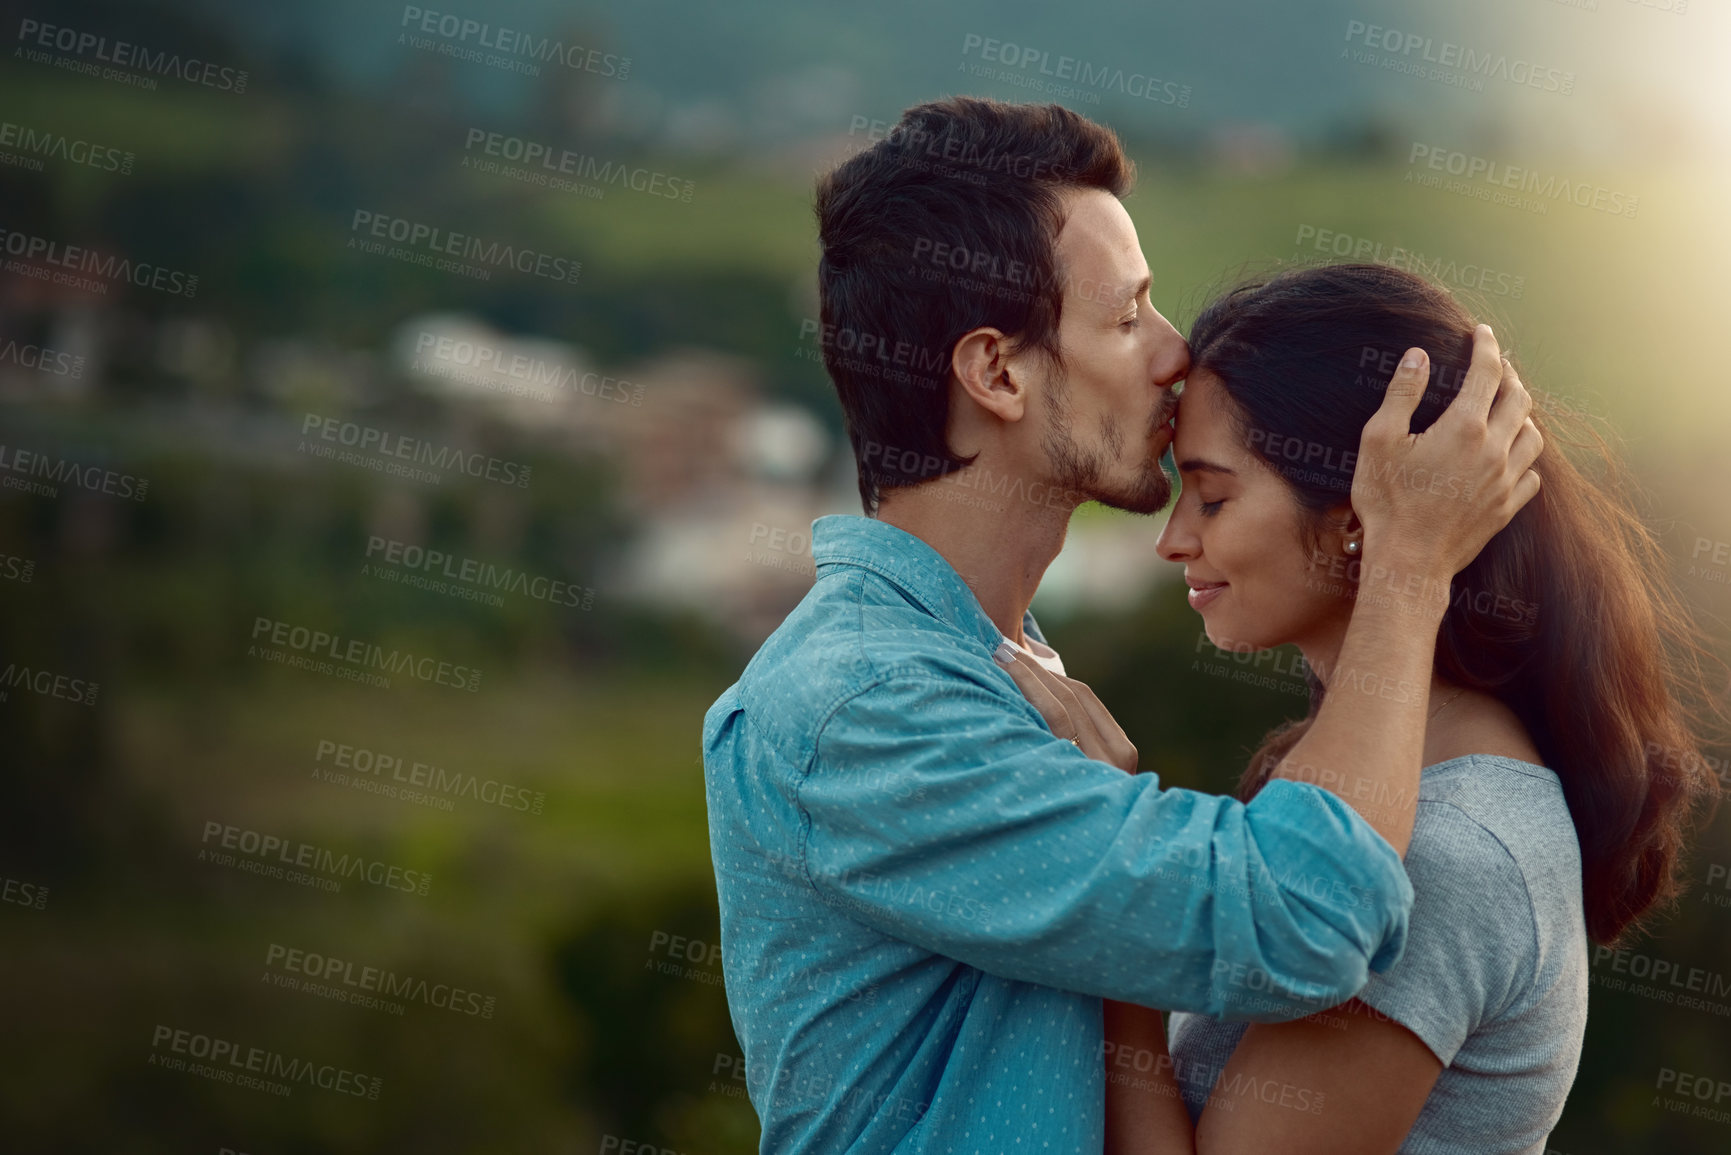 Buy stock photo Cropped shot of an affectionate young couple sharing a loving moment while standing outdoors